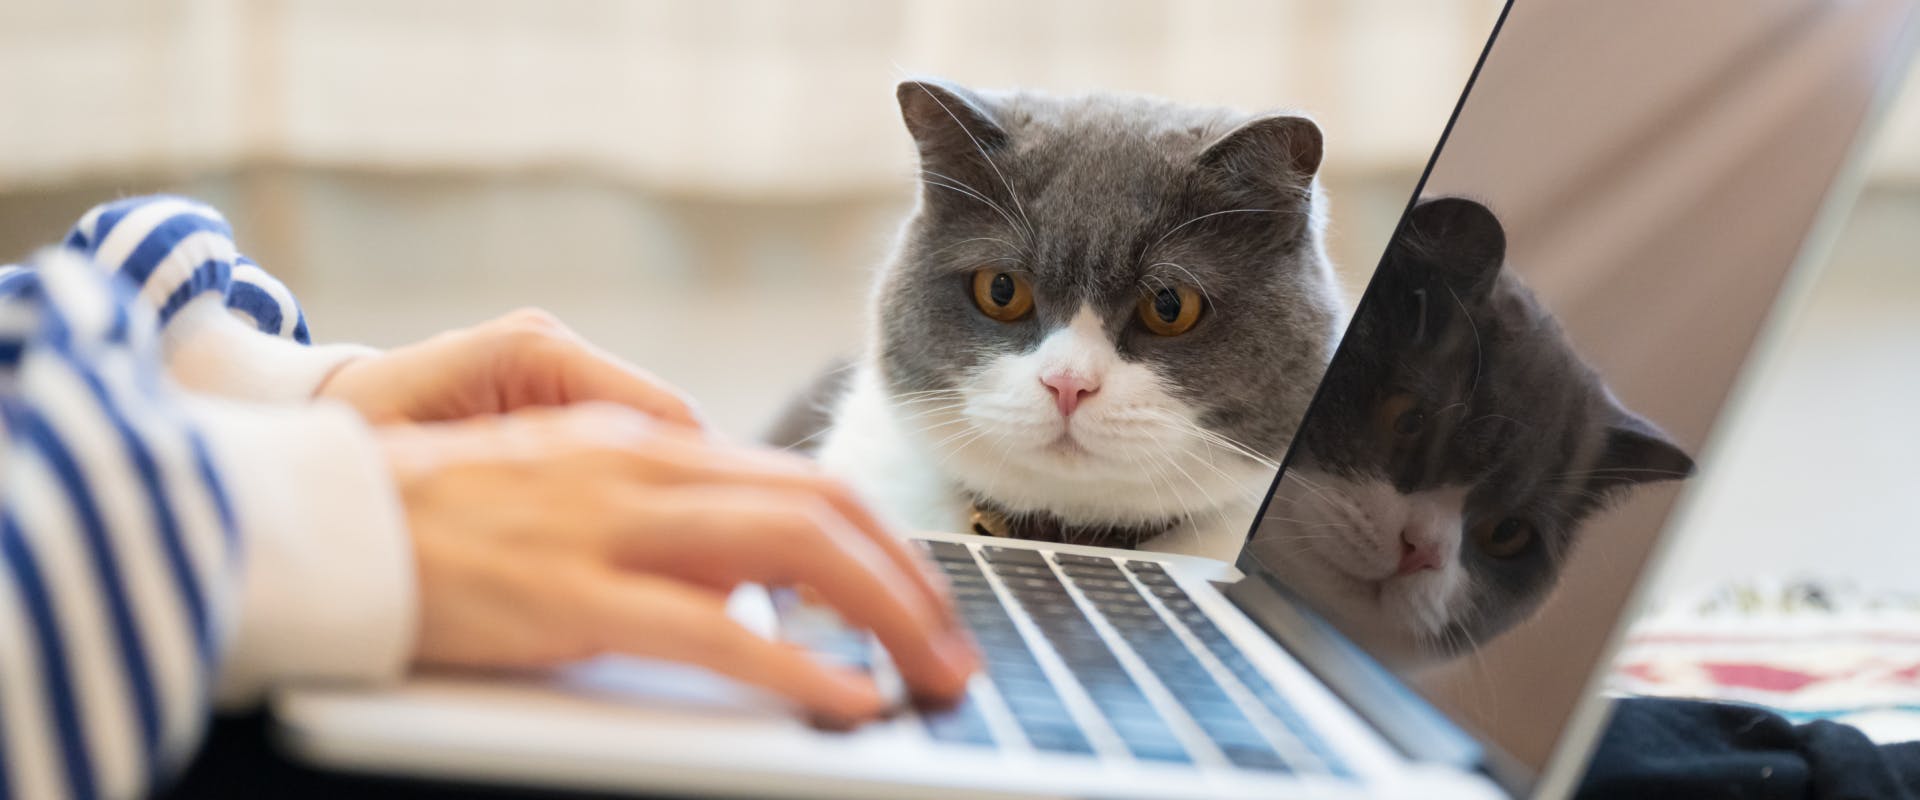 domesticat shorthair gray and white catch watching a human type on a laptop